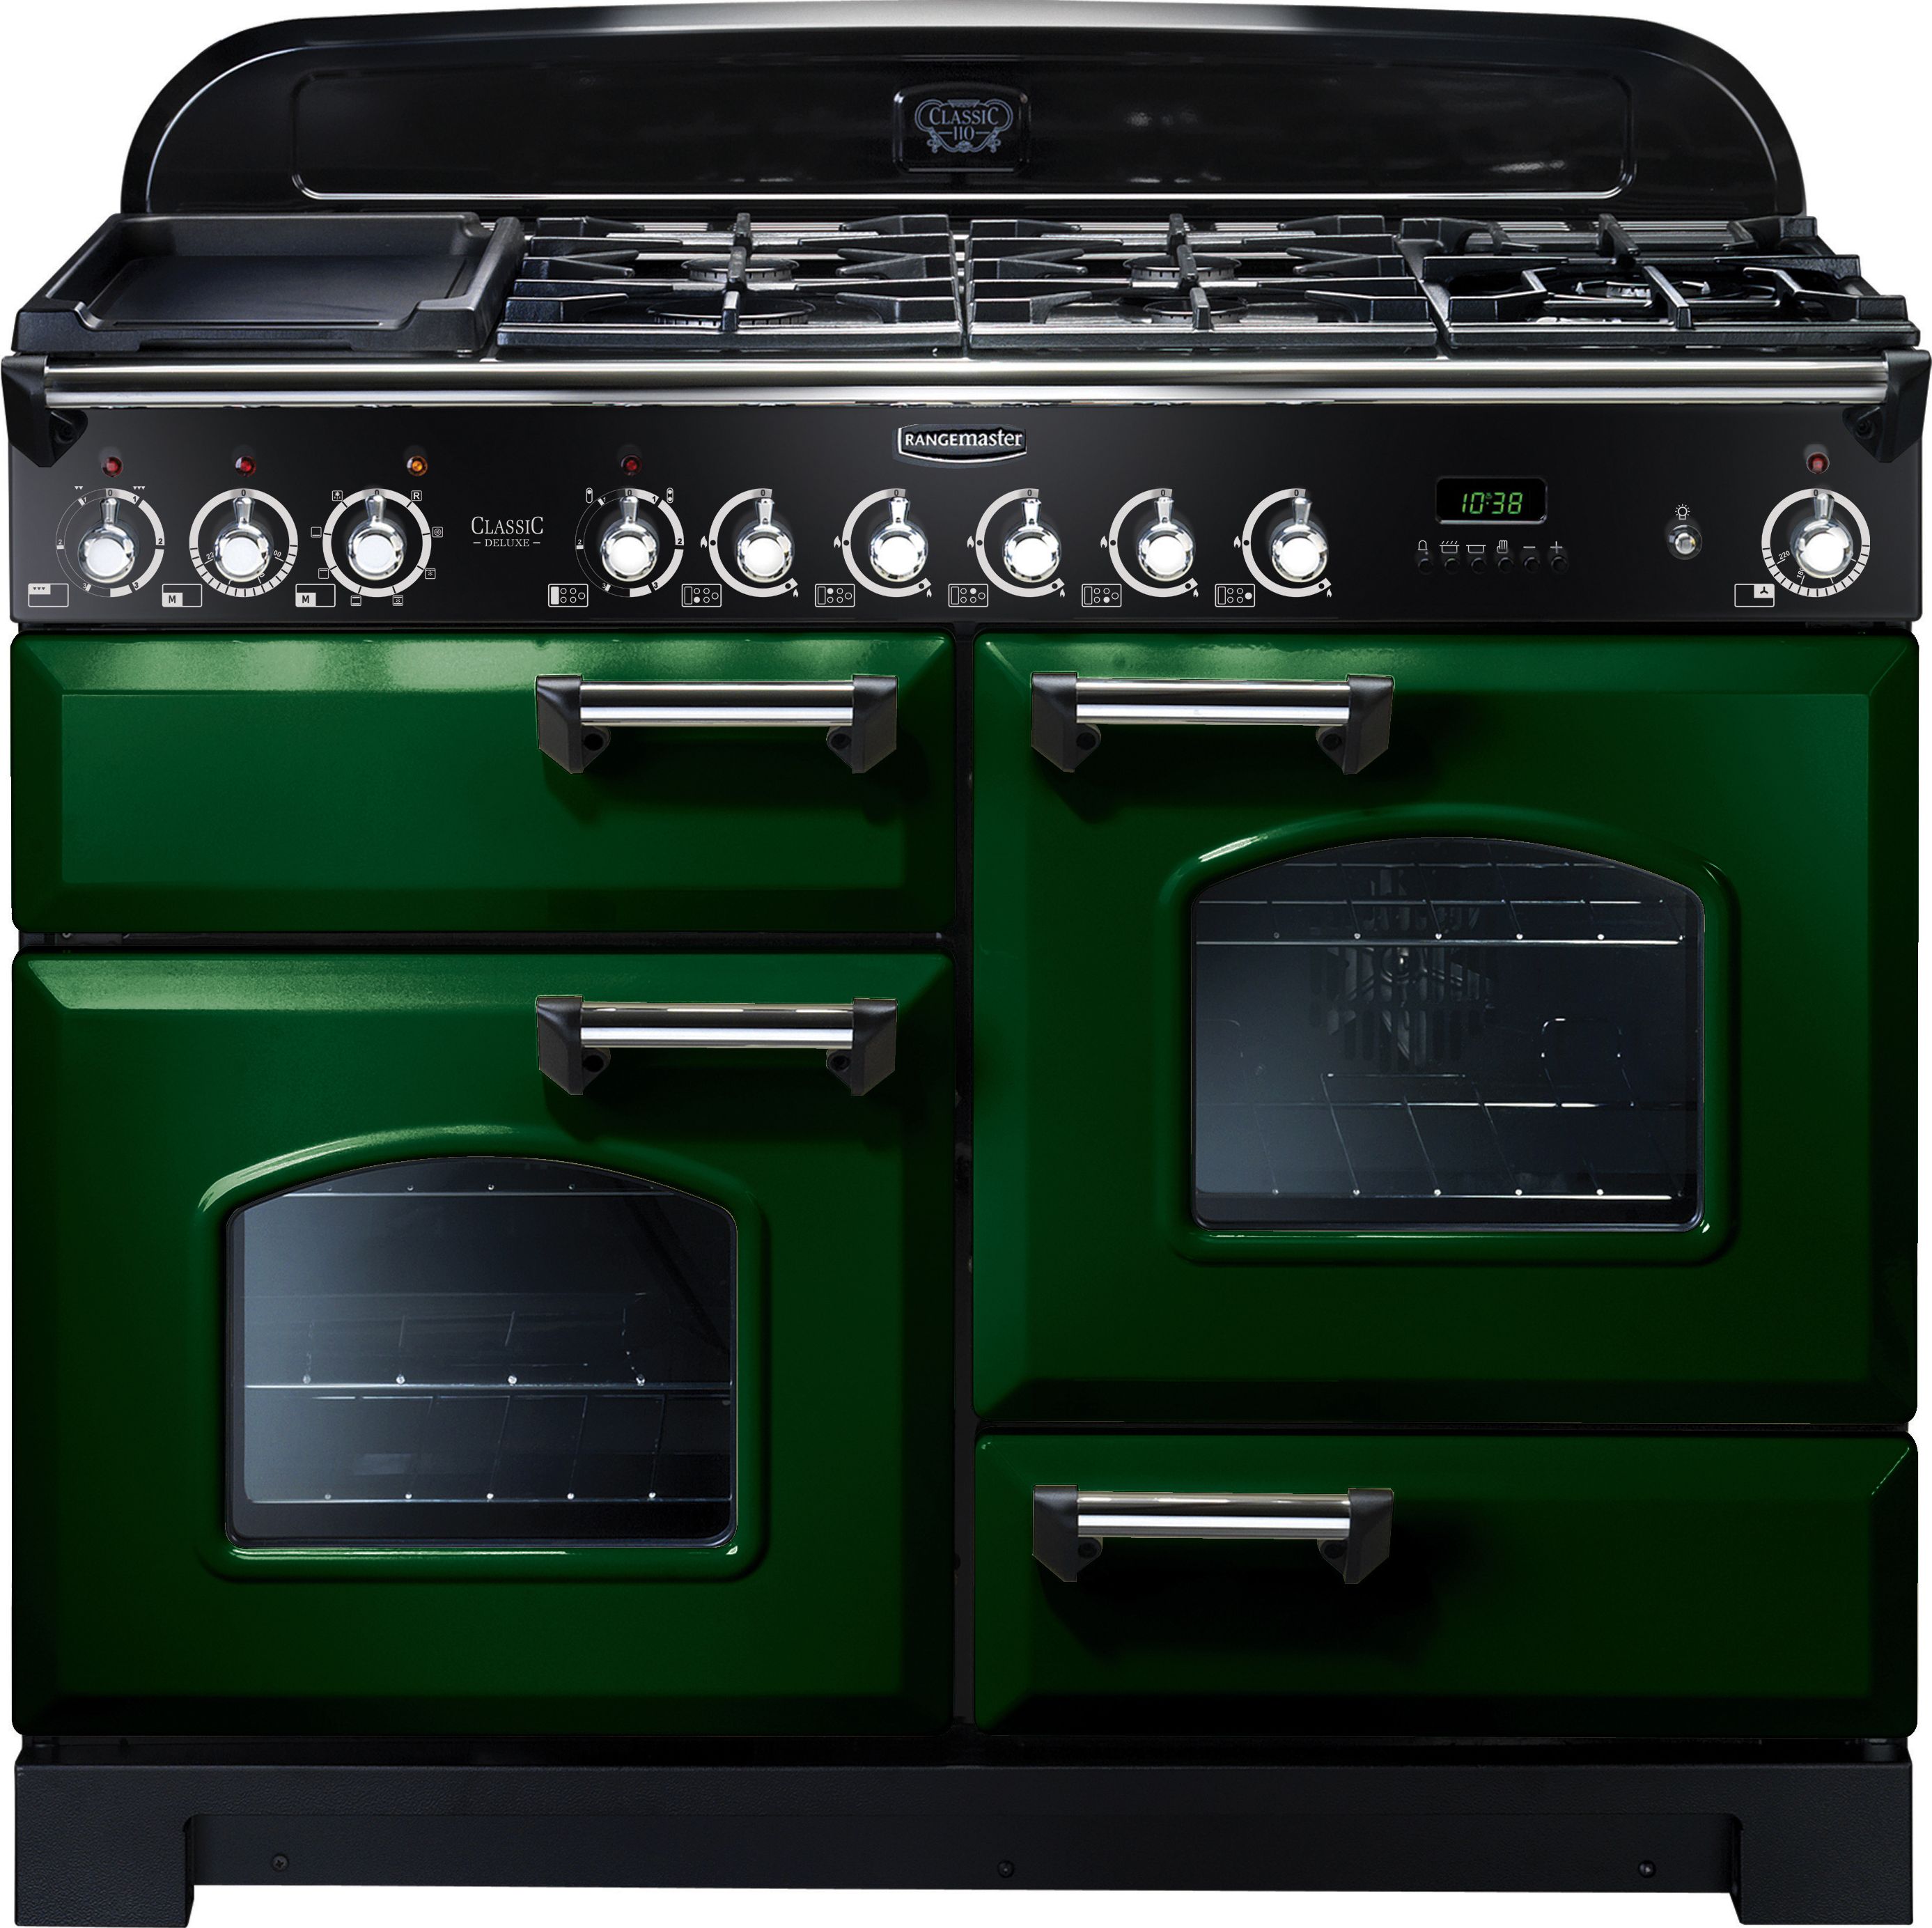 Rangemaster Classic Deluxe CDL110DFFRG/C 110cm Dual Fuel Range Cooker - Racing Green / Chrome - A/A Rated, Green